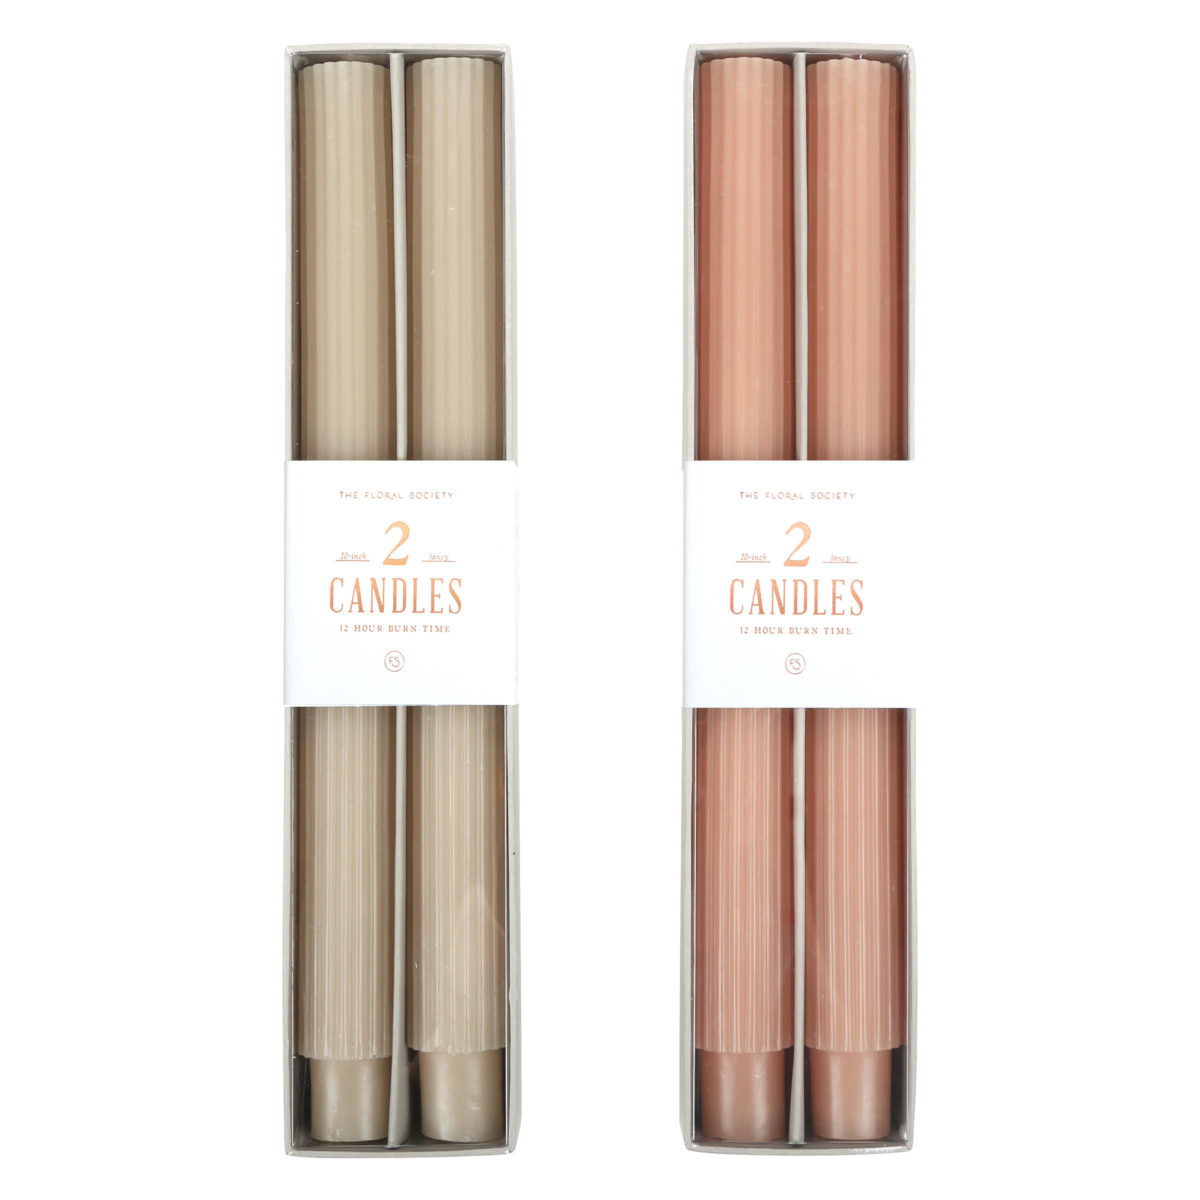 A set of taper candles